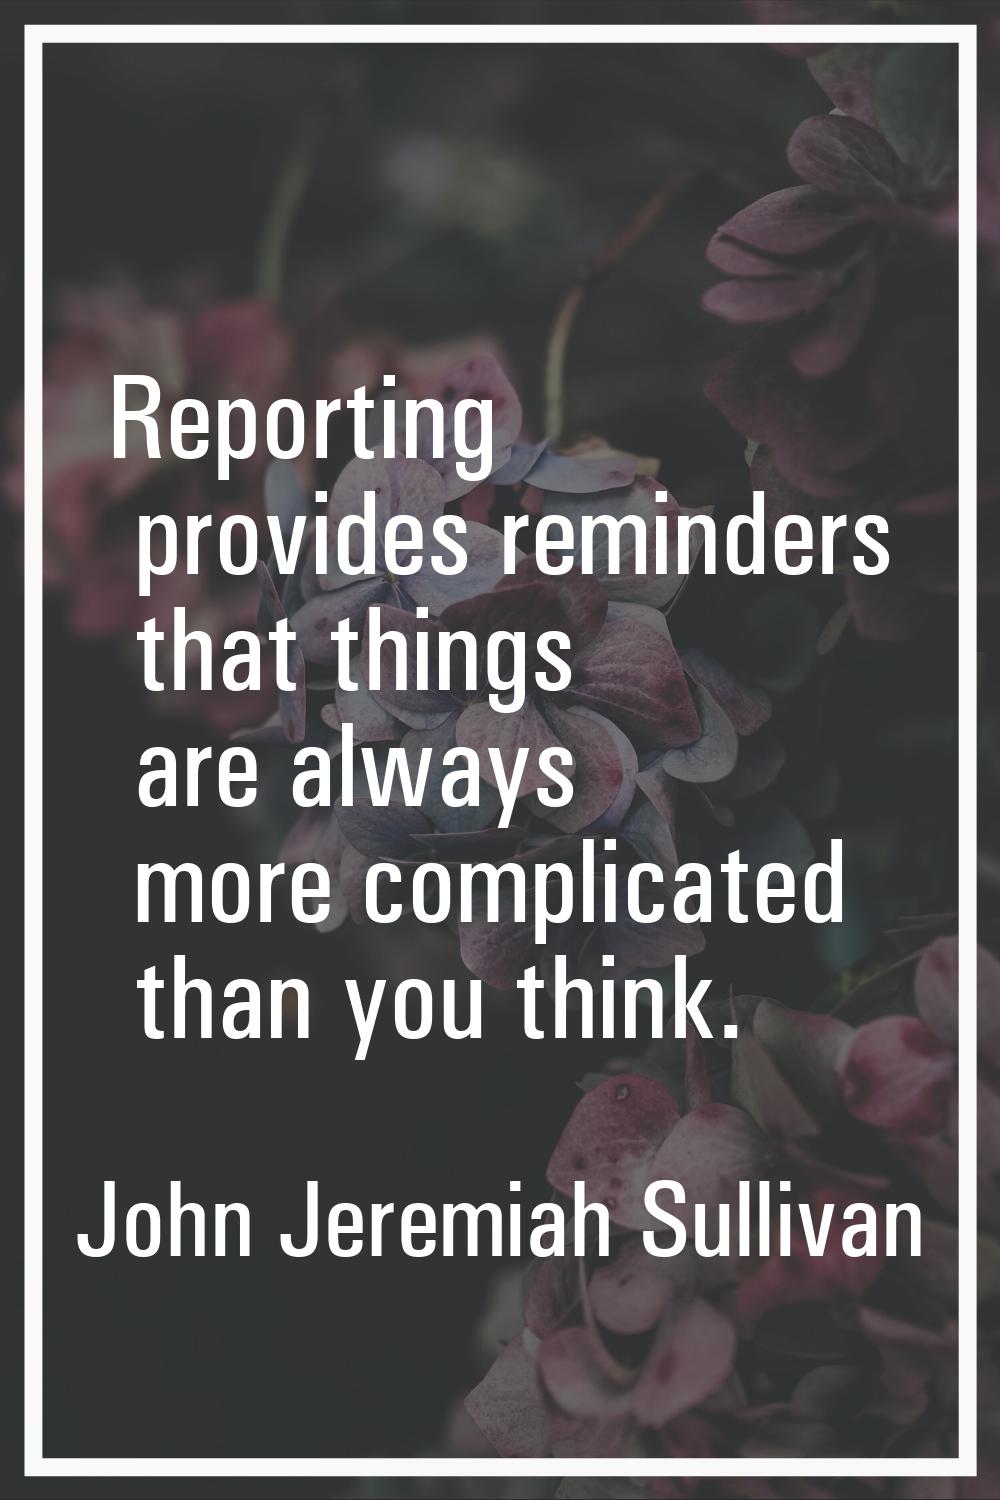 Reporting provides reminders that things are always more complicated than you think.